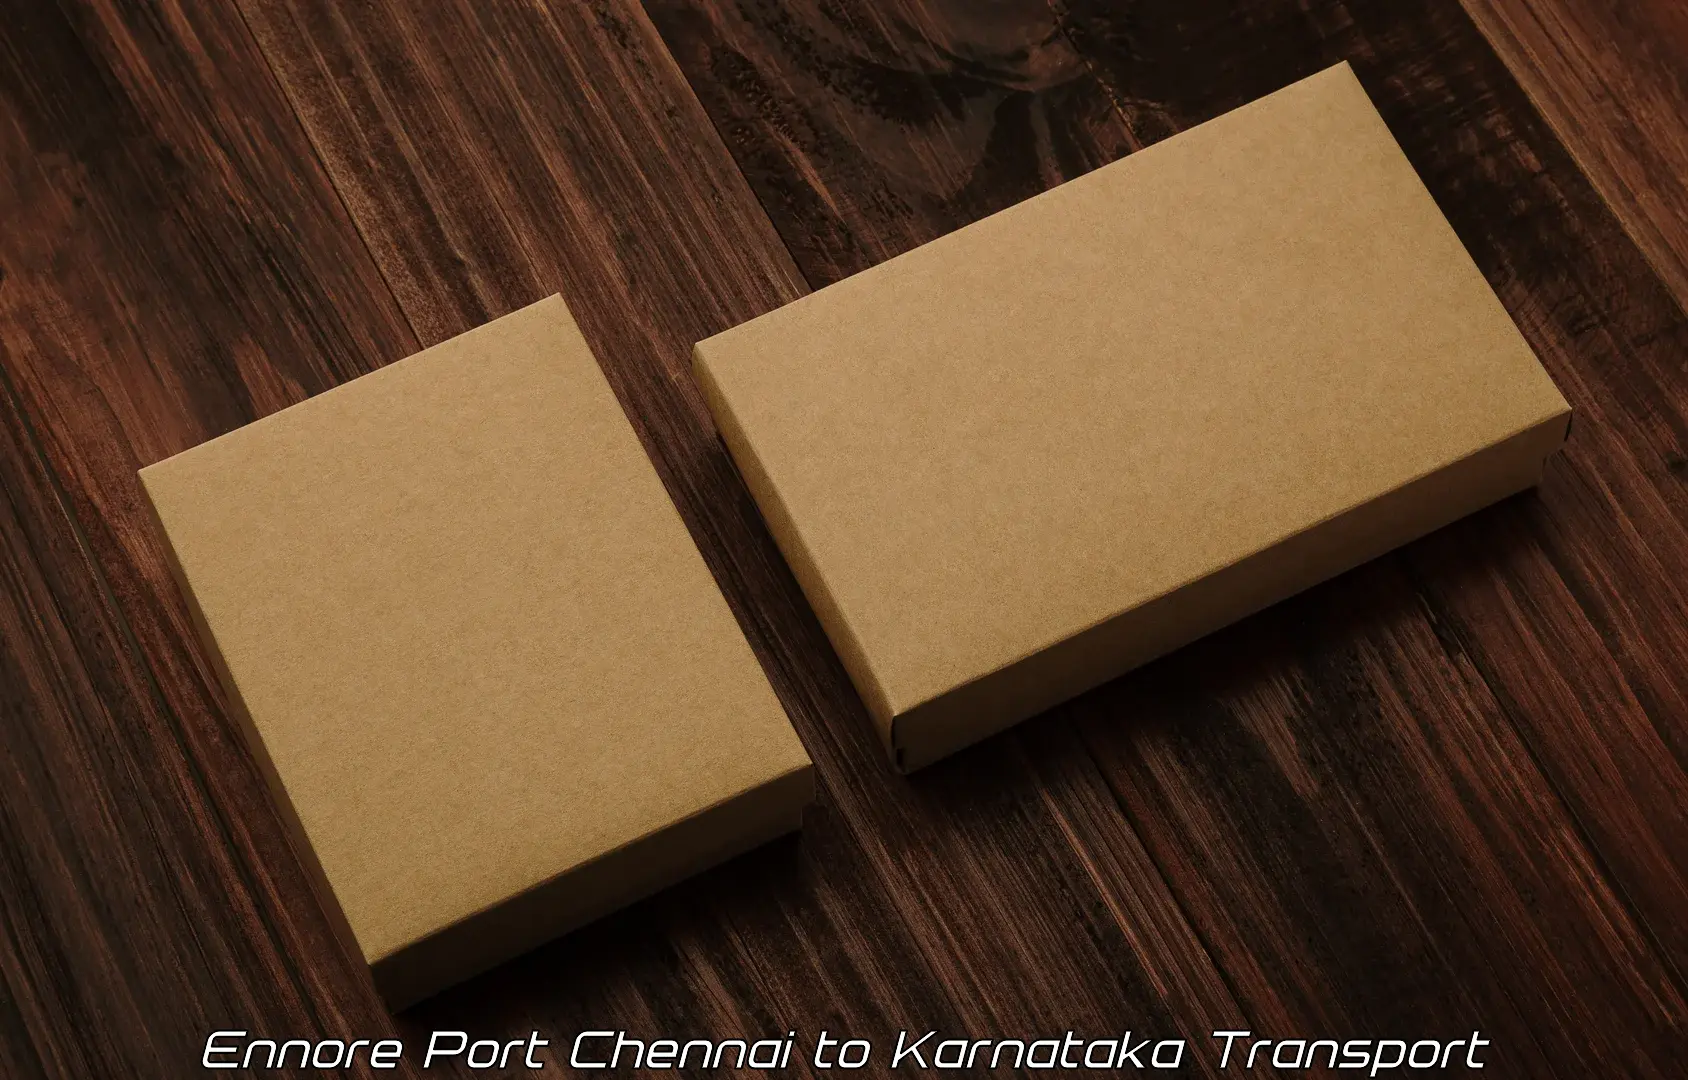 Transport bike from one state to another Ennore Port Chennai to Karnataka